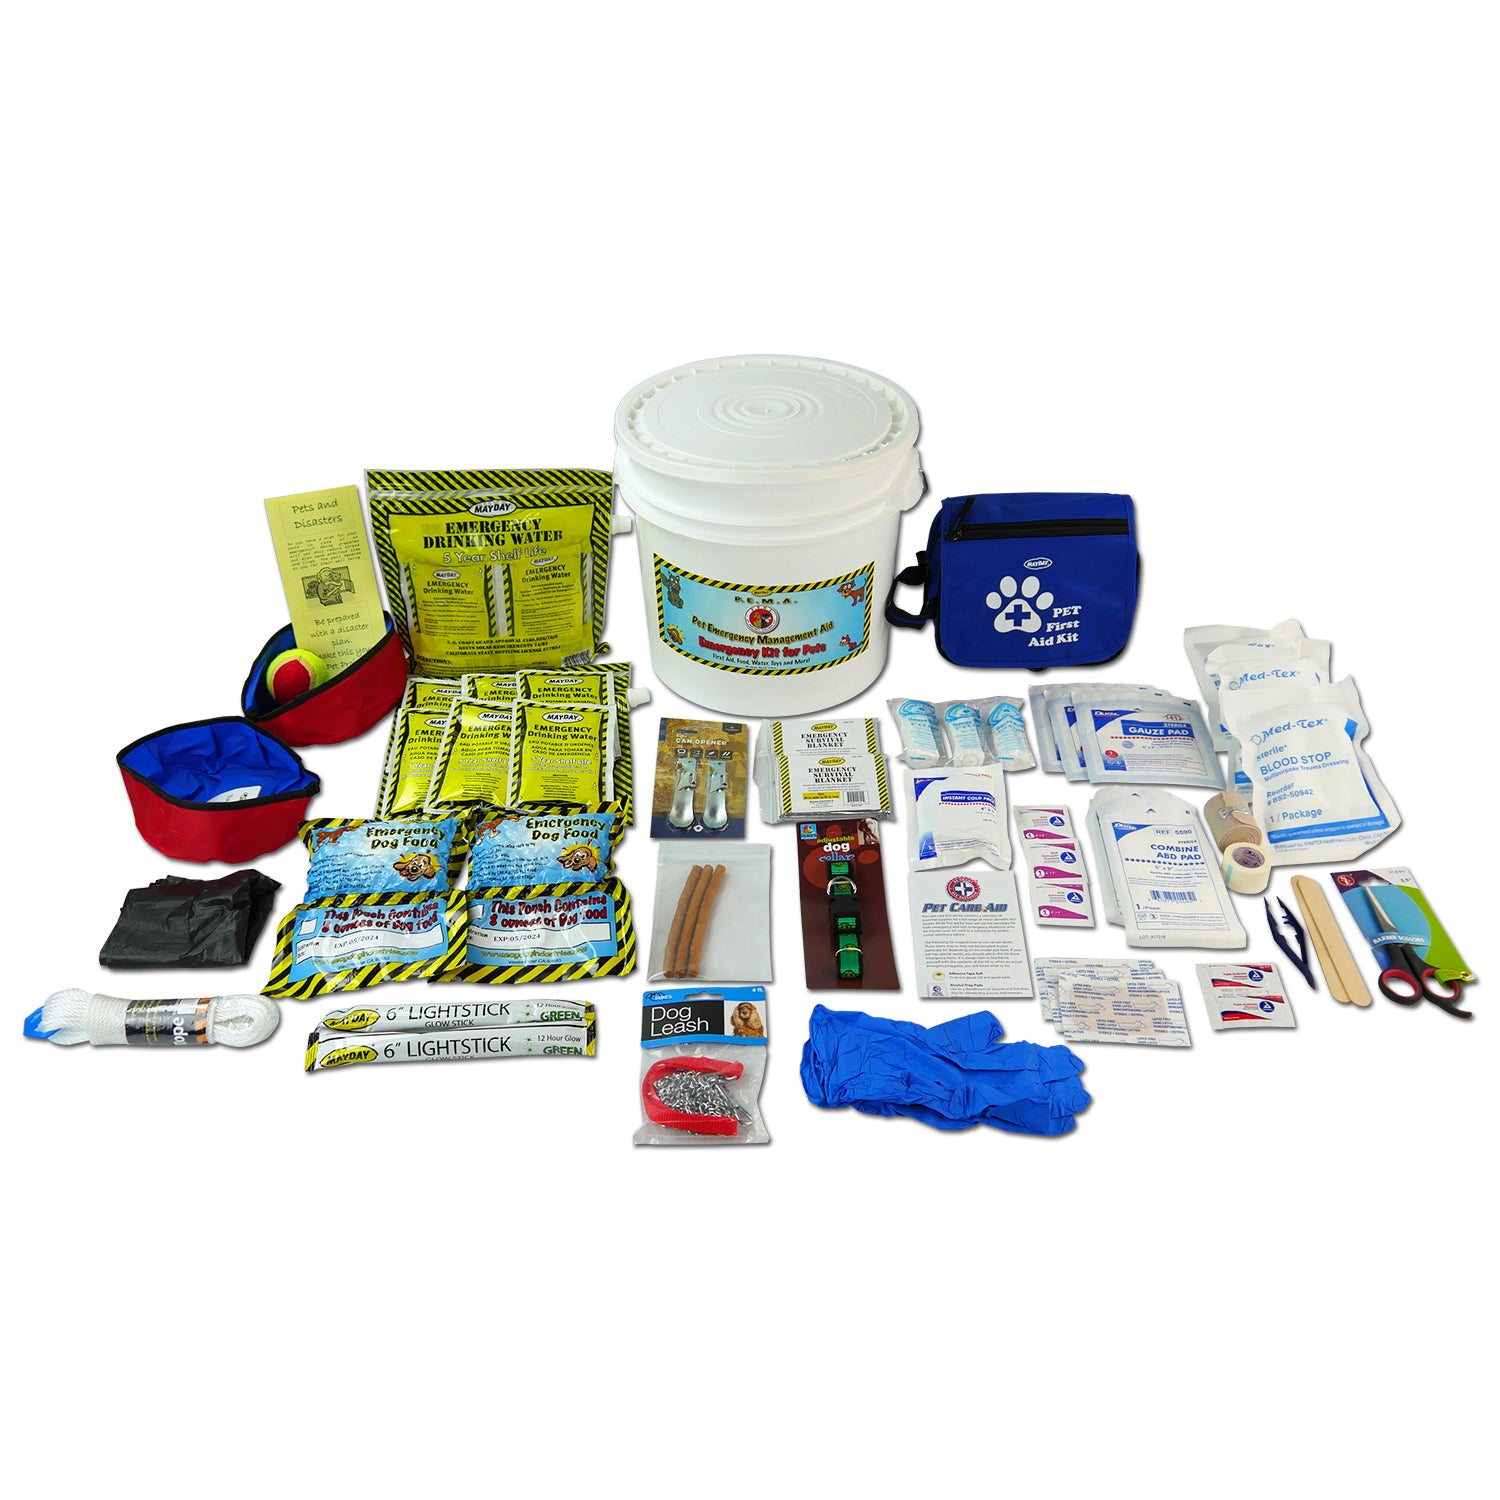 EMERGENCY DOG KIT WITH FIRST AID, FOOD, WATER, TOYS AND MORE 5 YEAR SHELF LIFE